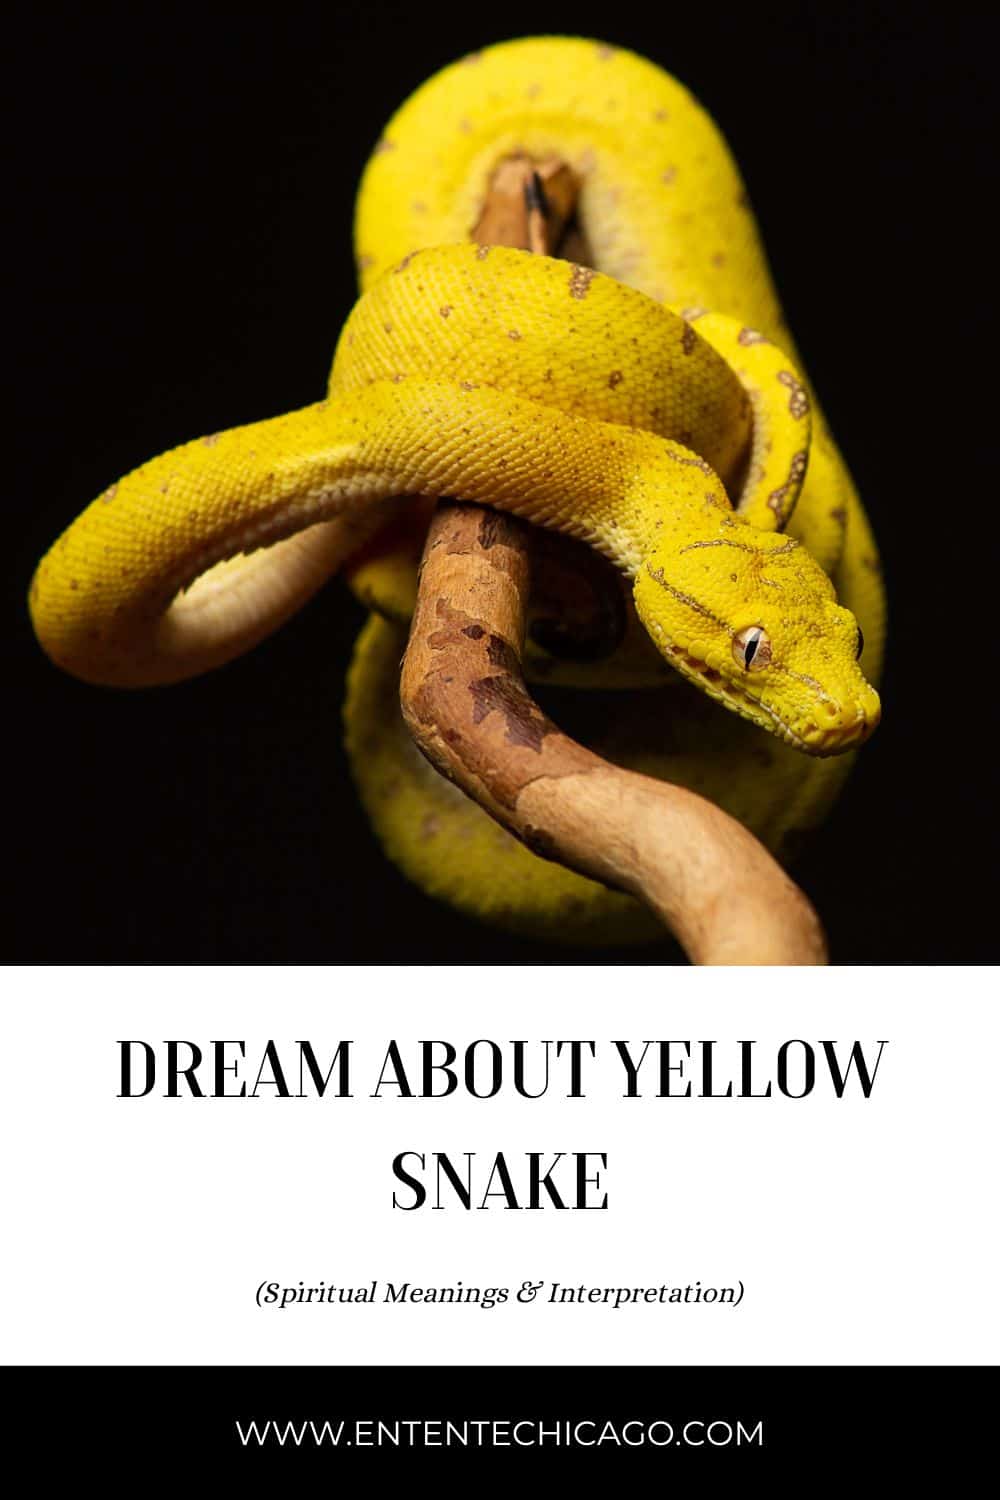 4. Dreams About Yellow Snakes